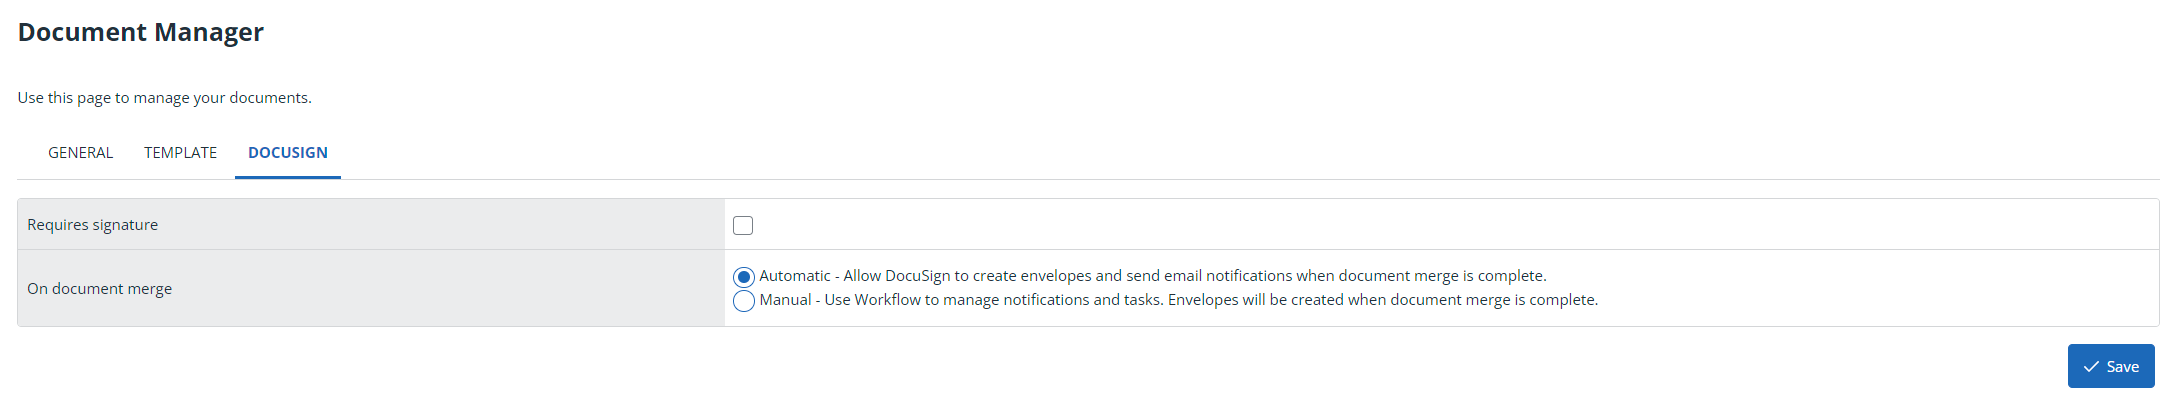 Docusign tab on document manager.